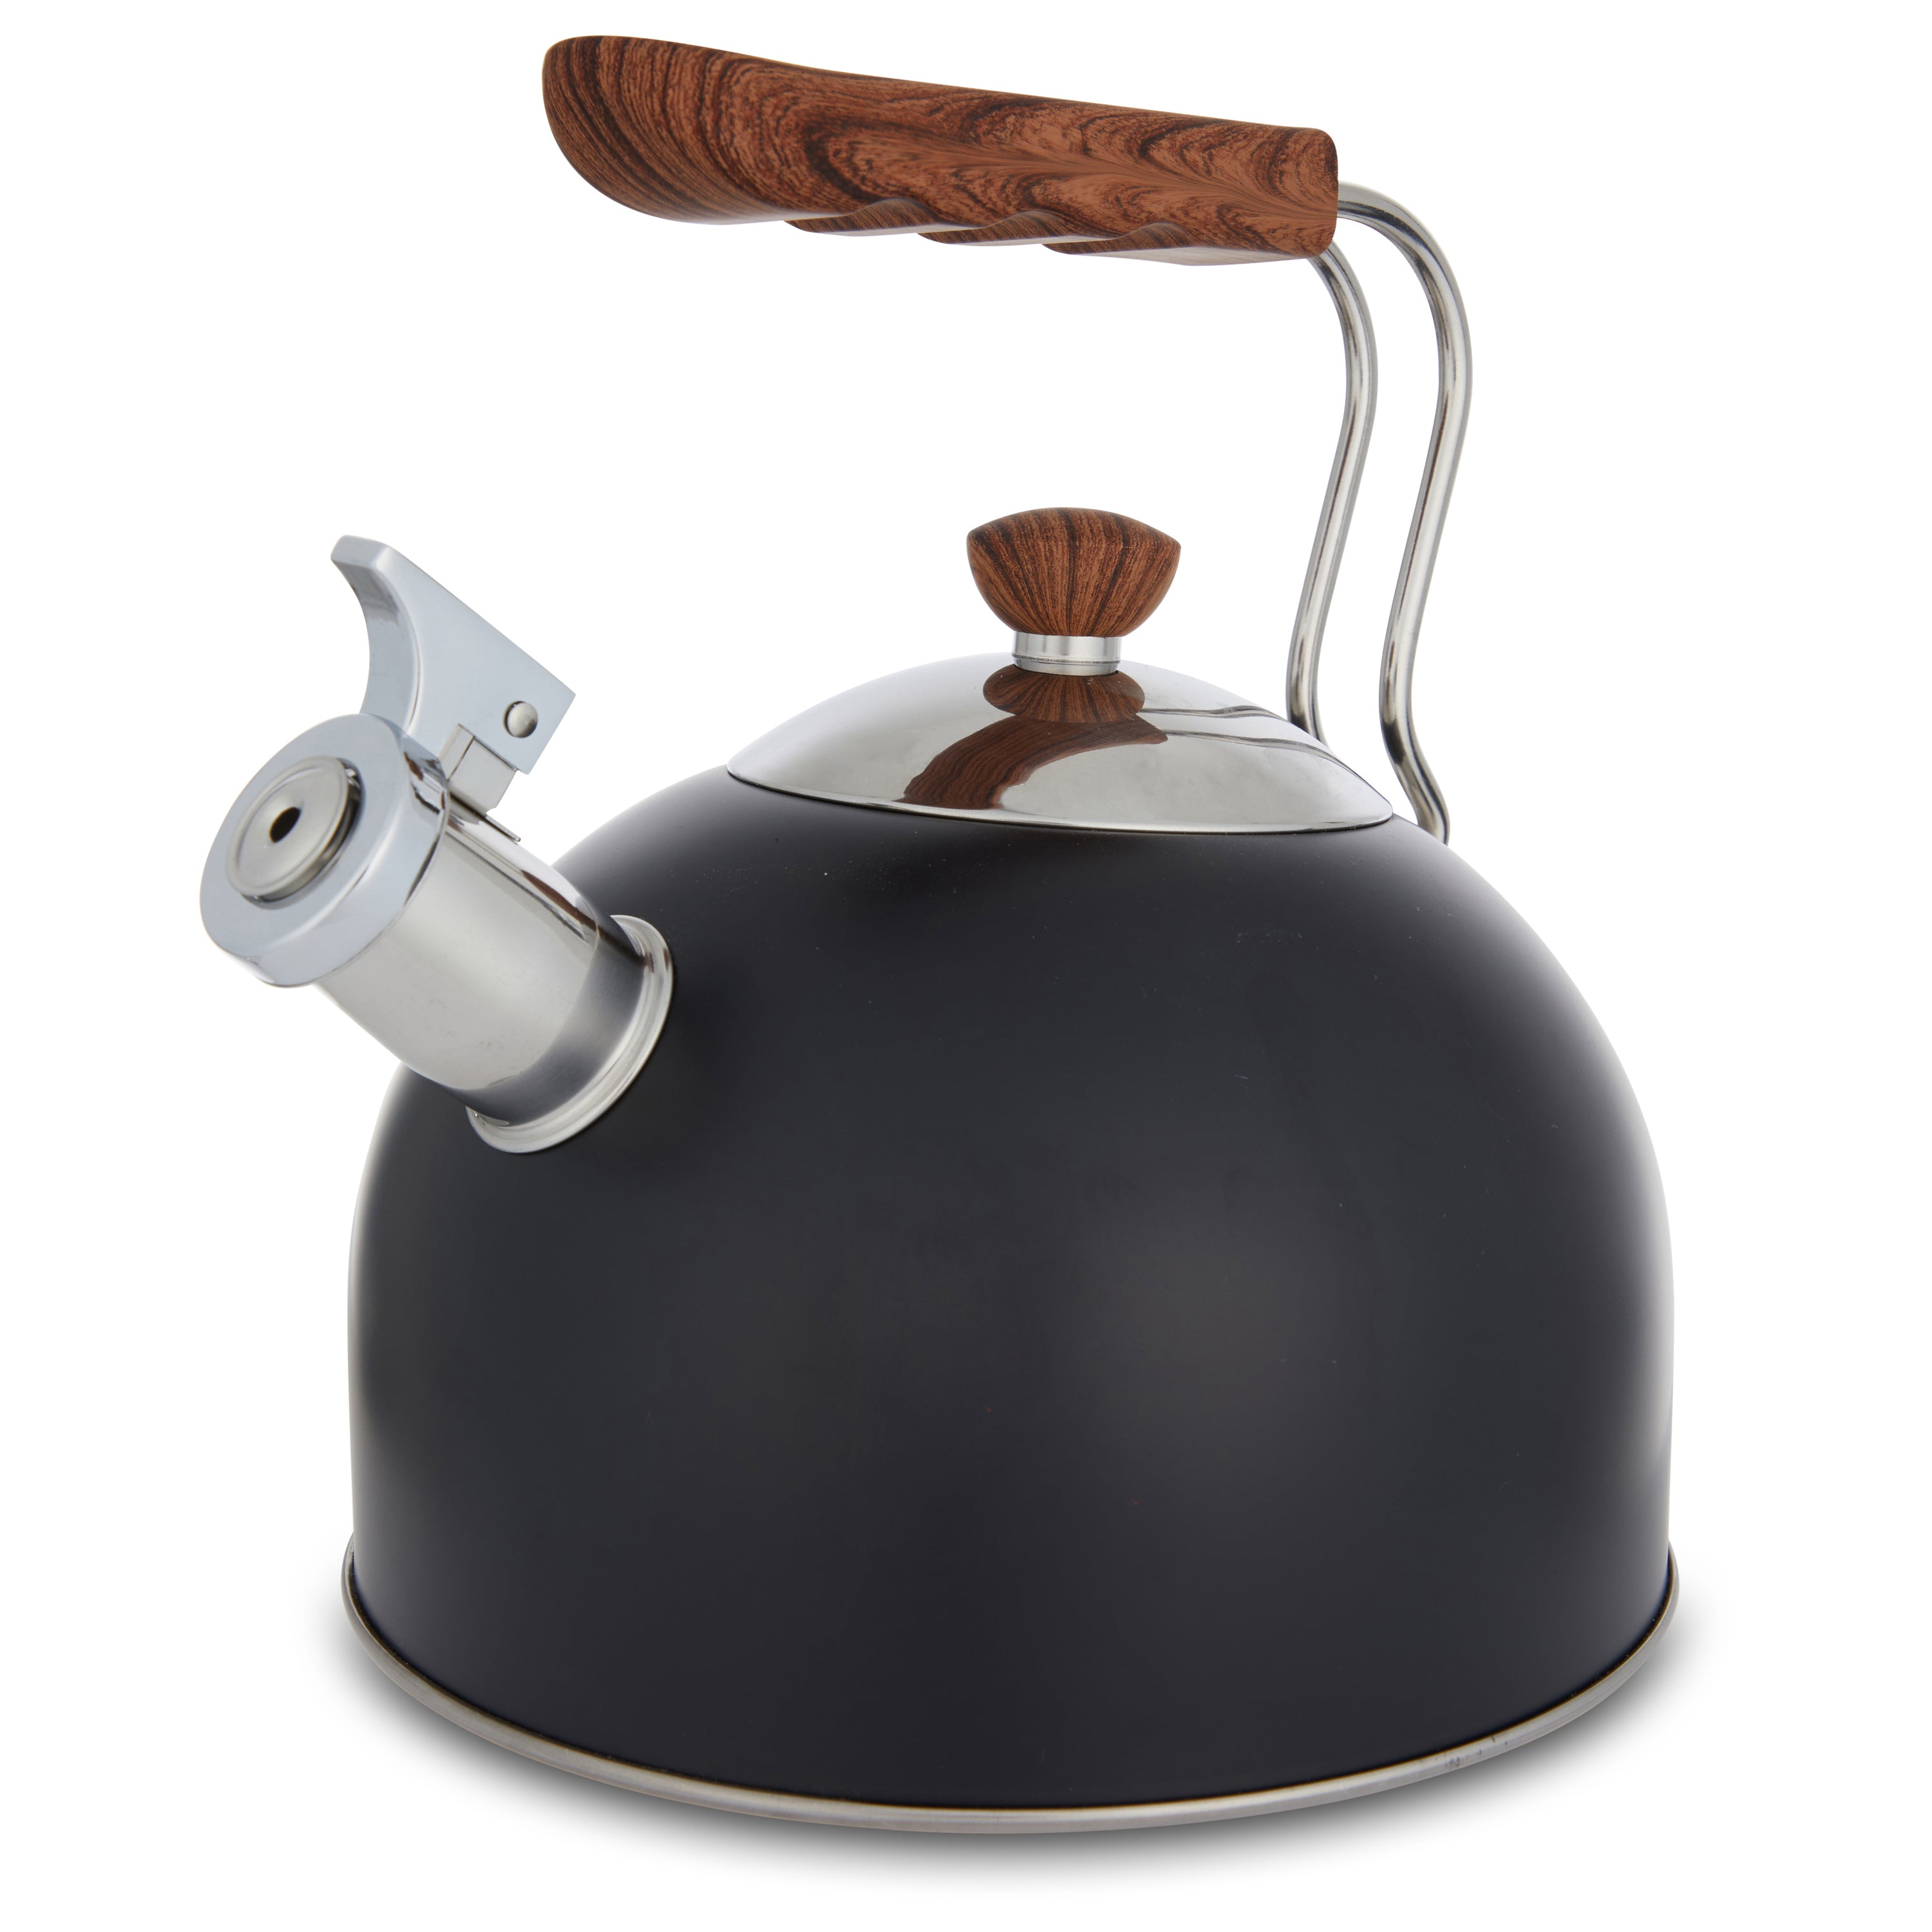 Presley Dark Green Kettle by Pinky Up